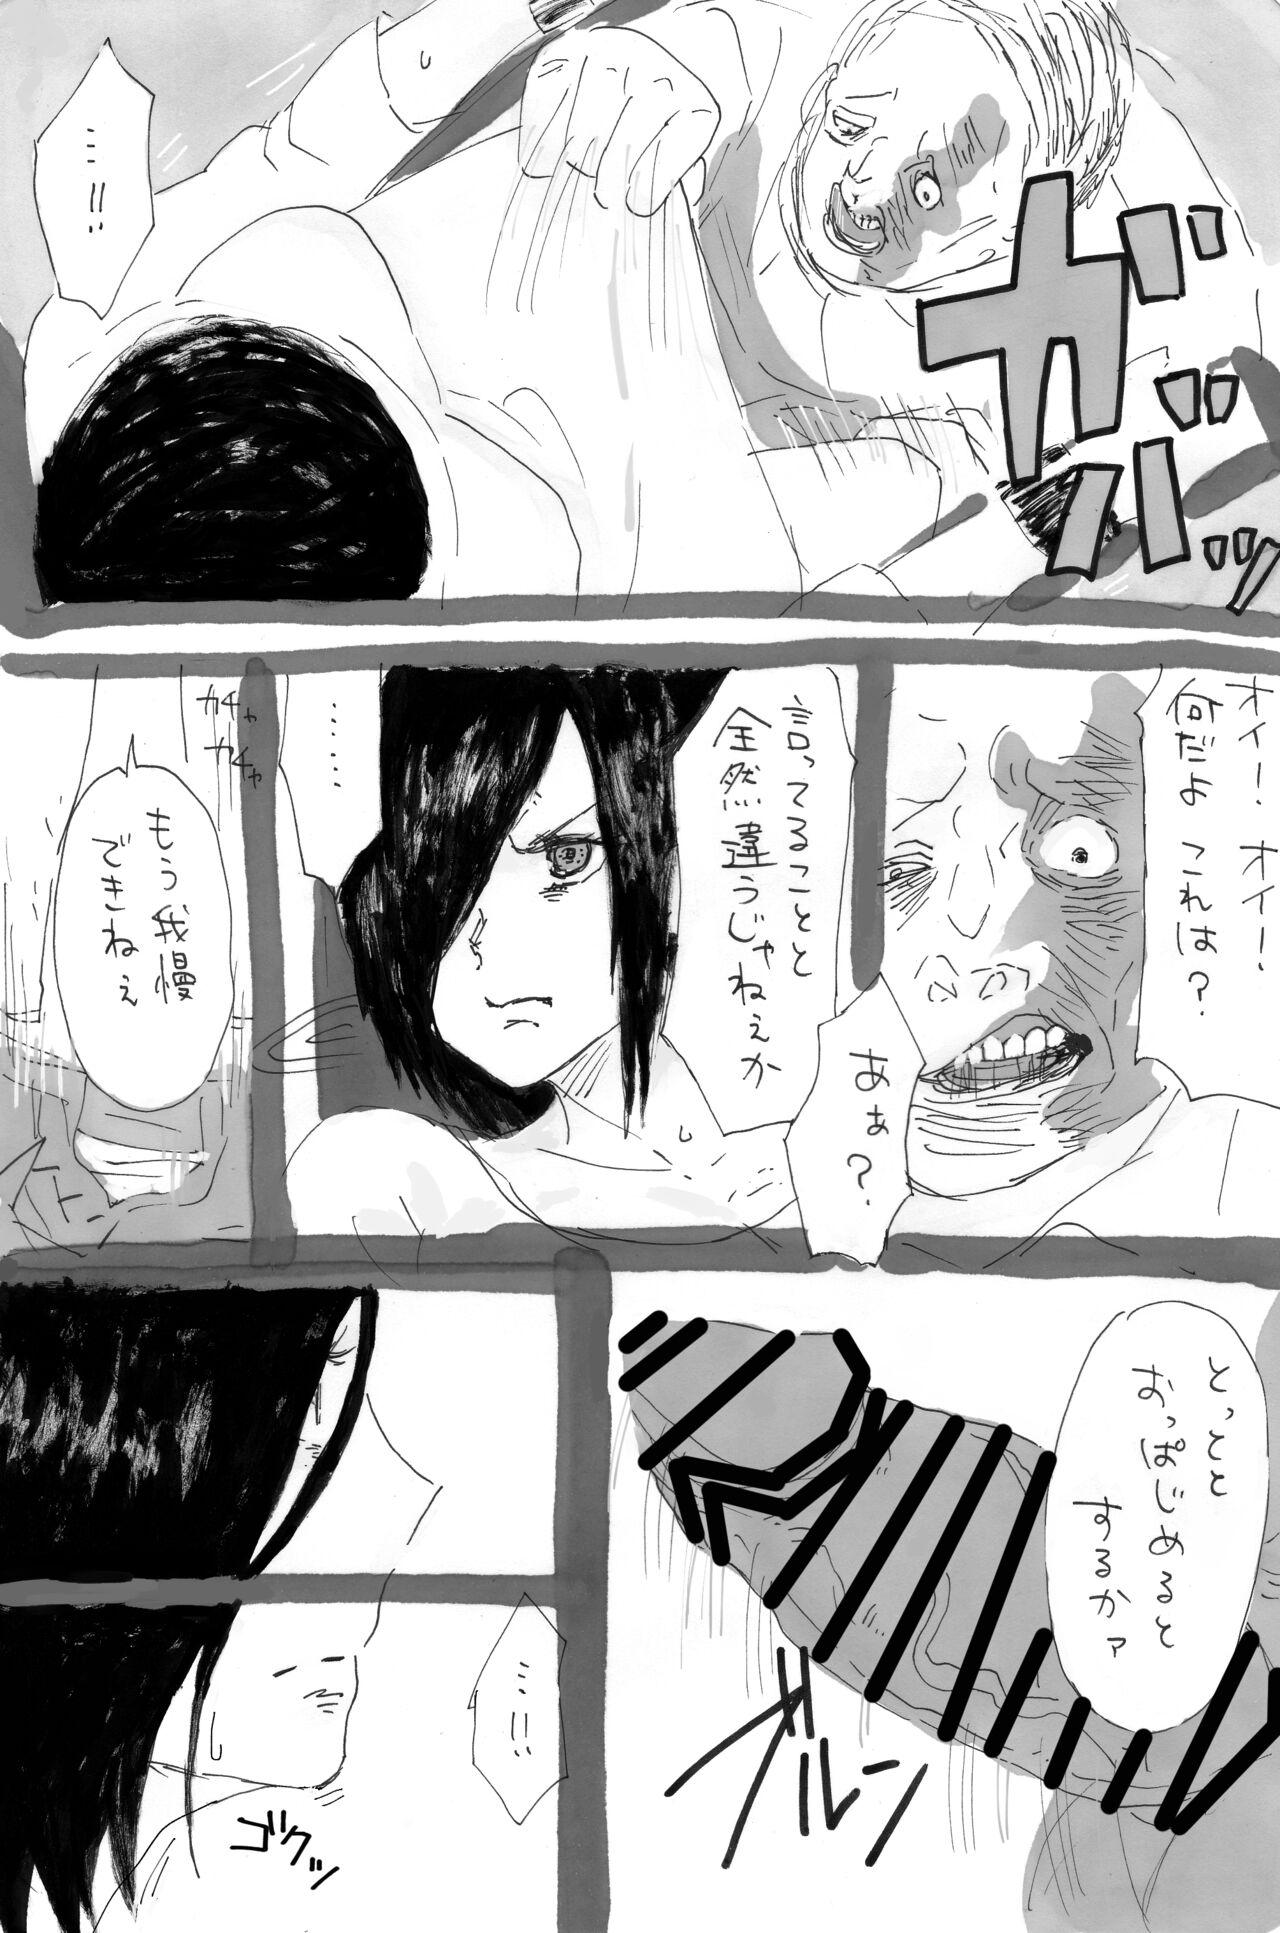 Spying トーカちゃん囚われIF - Tokyo ghoul Short - Page 9